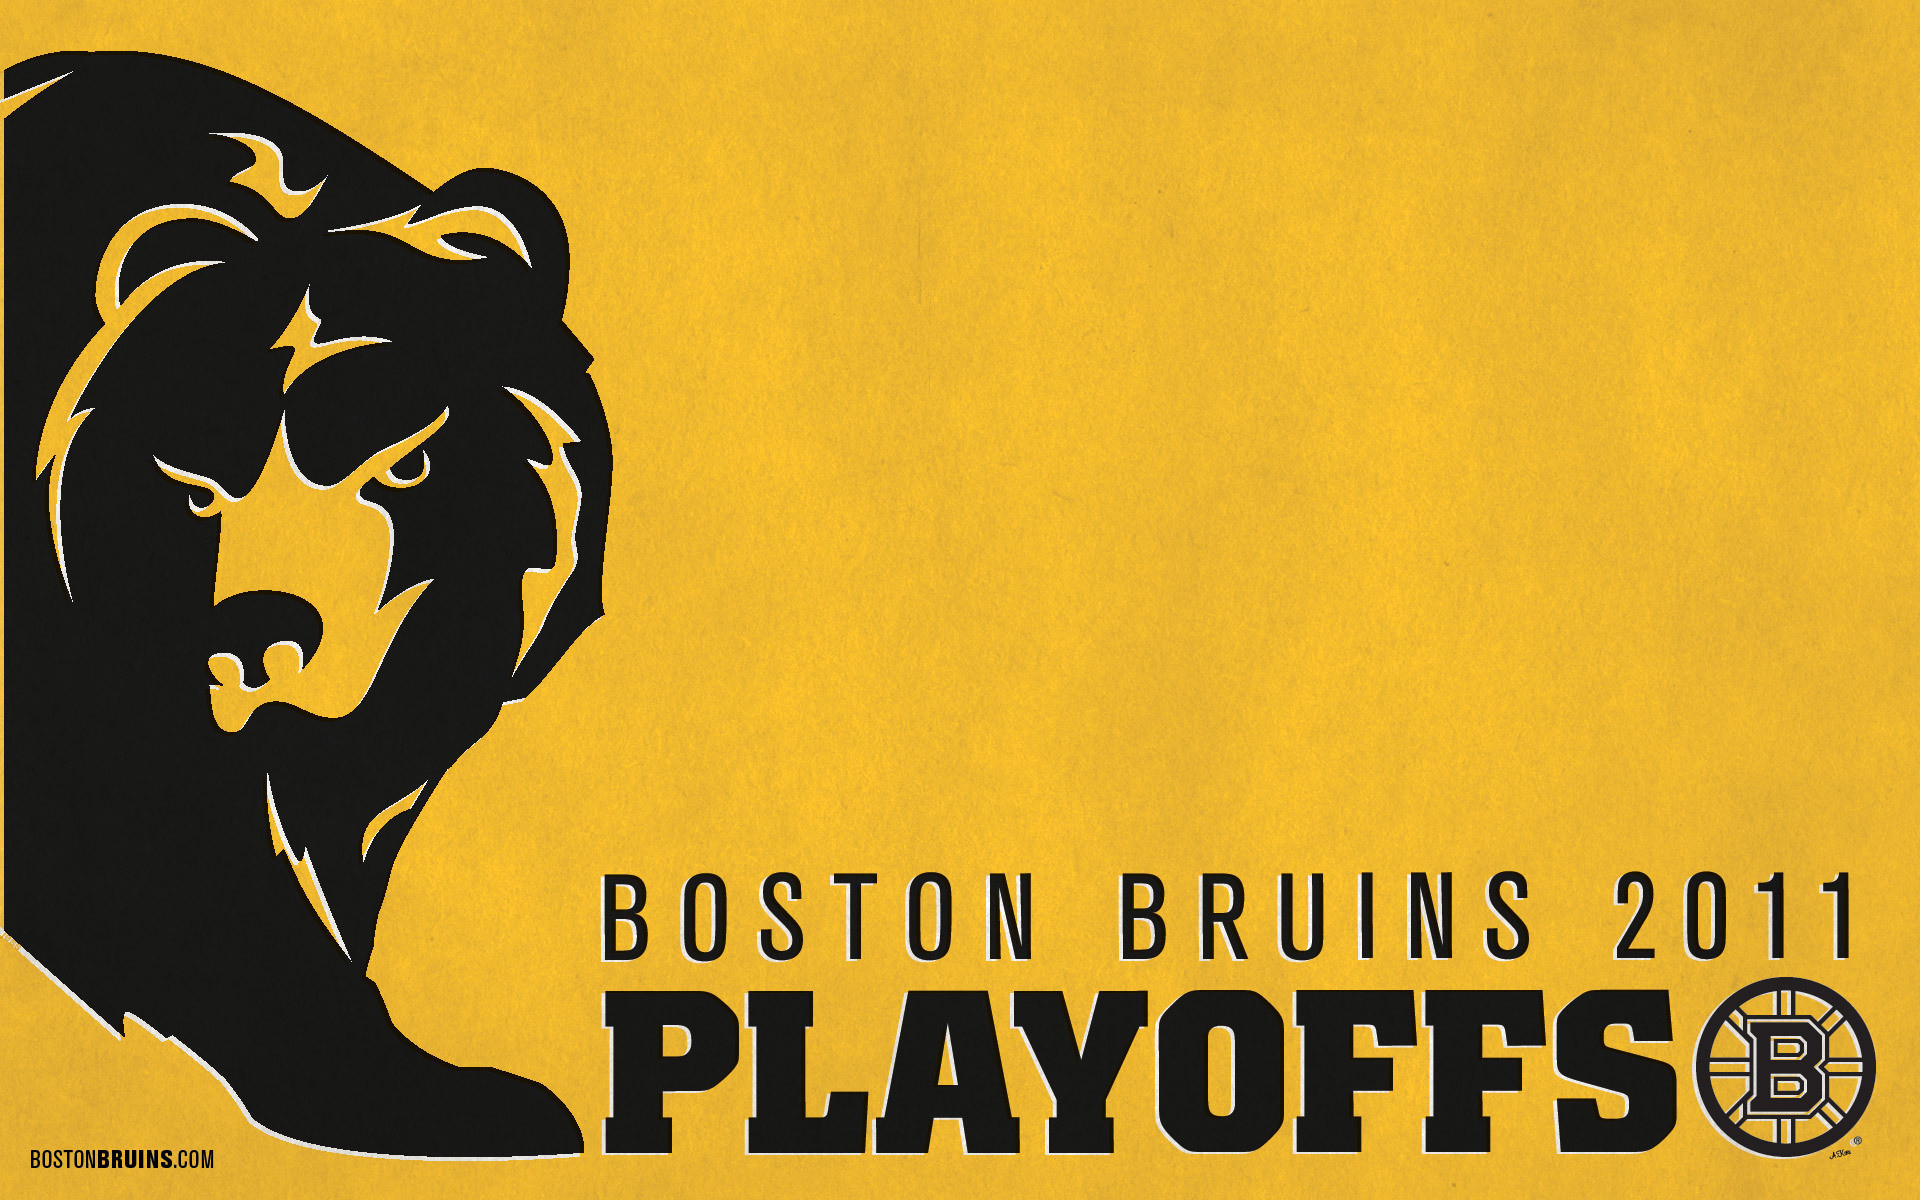 1920x1200 Boston Bruins images Boston Bruins 2011 Playoffs HD wallpaper and background  photos